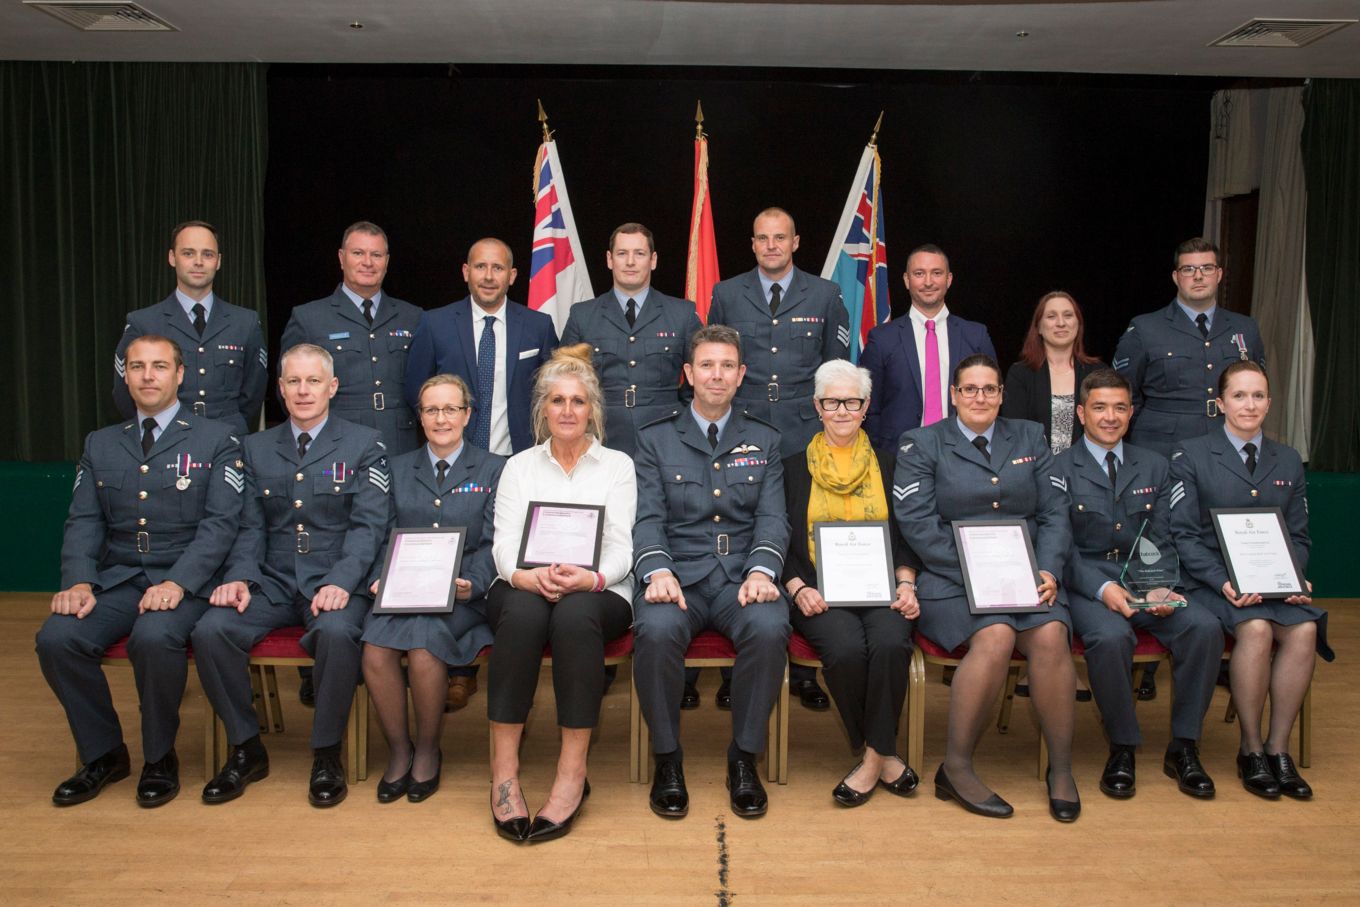 Group image of recipients with awards